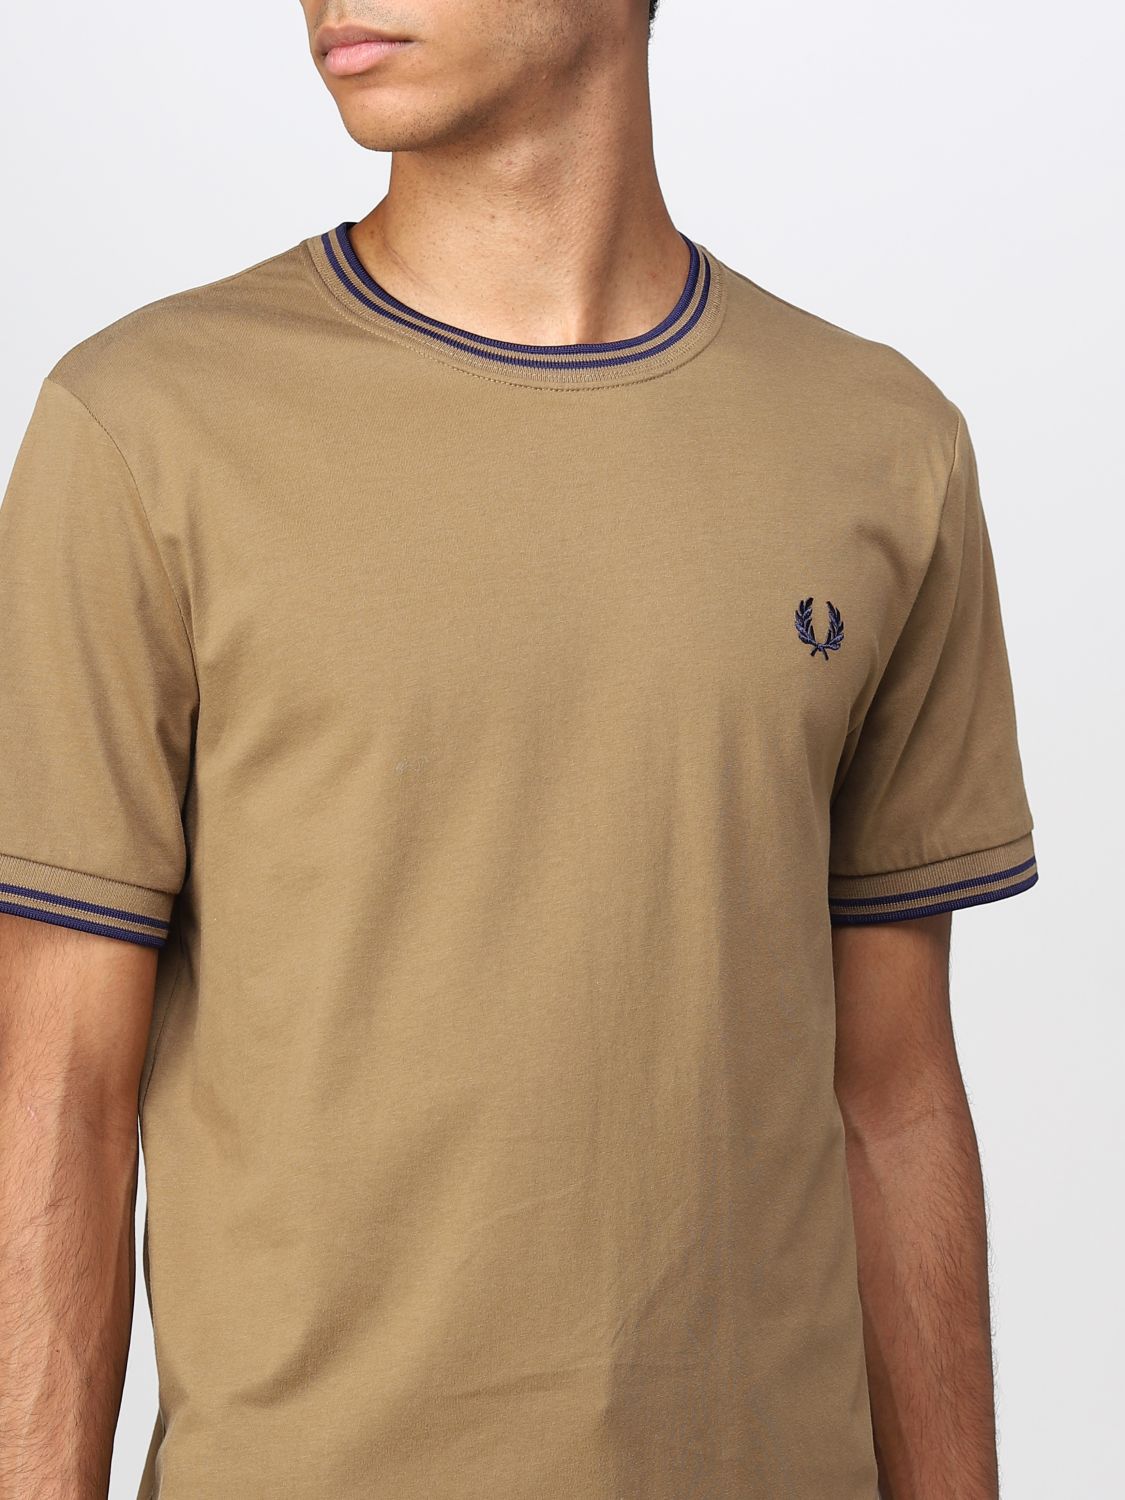 T恤 Fred Perry: Fred Perryt恤男士 棕色 3